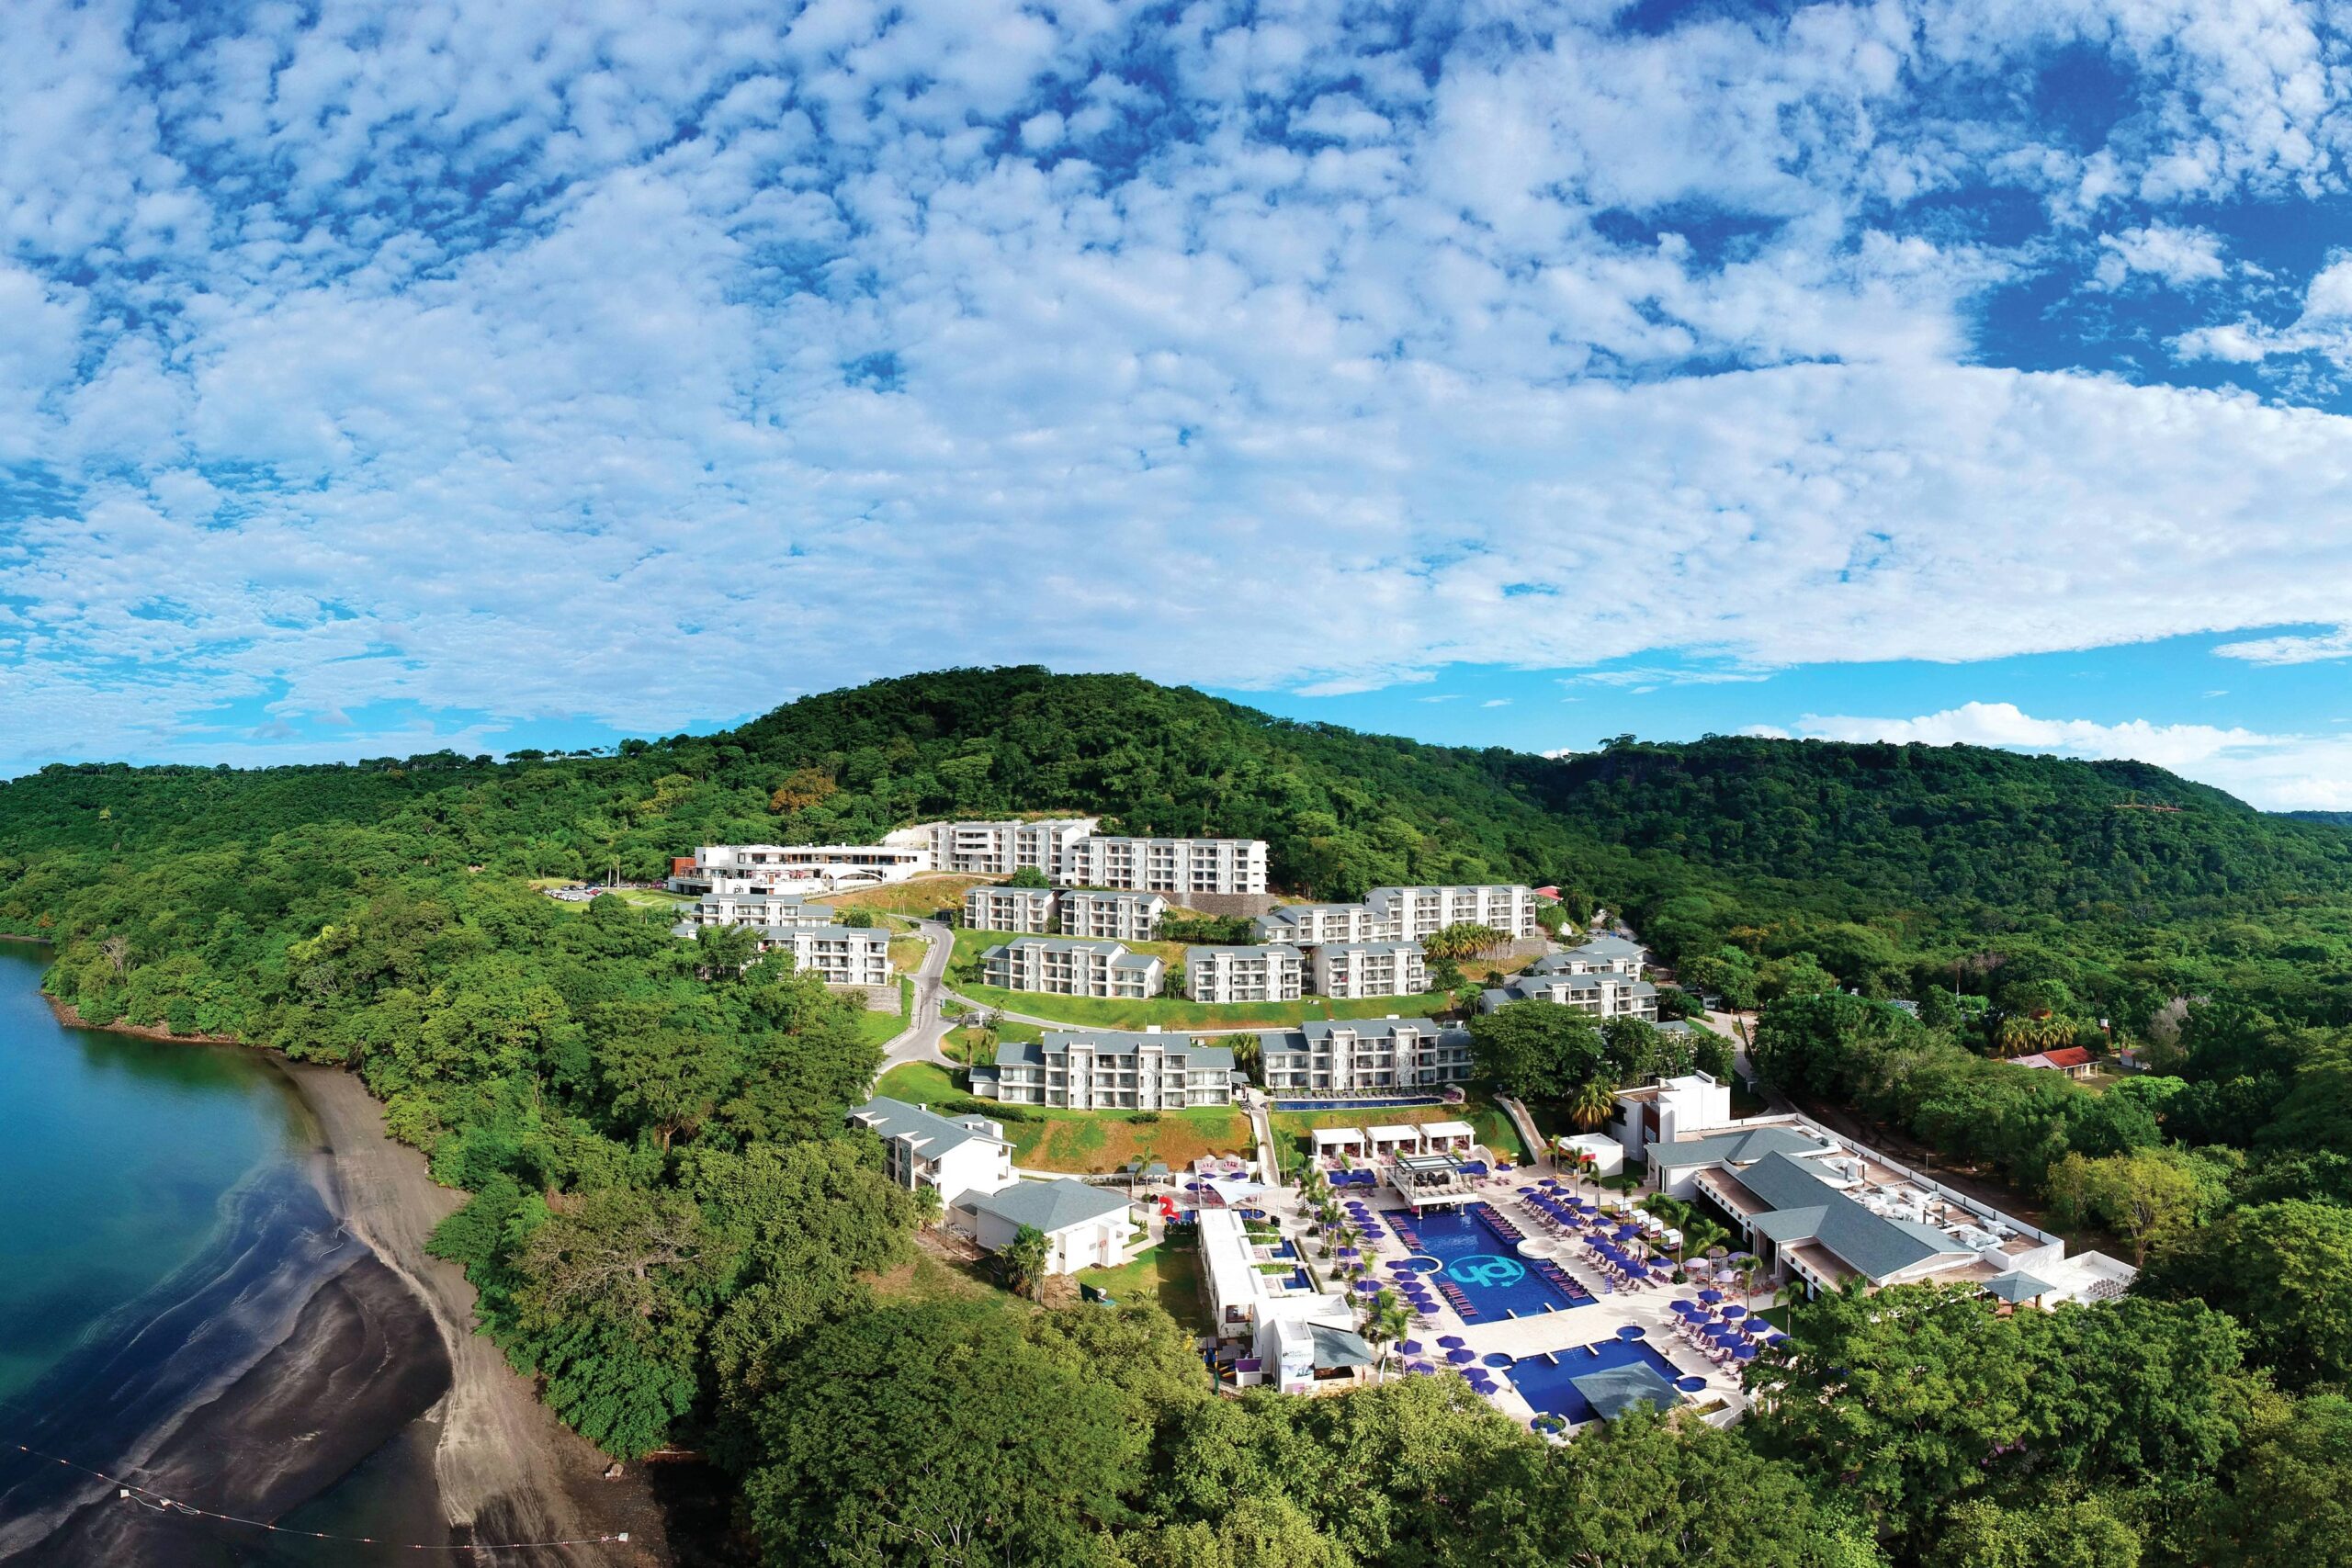 Experience an unforgettable Costa Rica New Years celebration and toast to new beginnings in this tropical paradise!